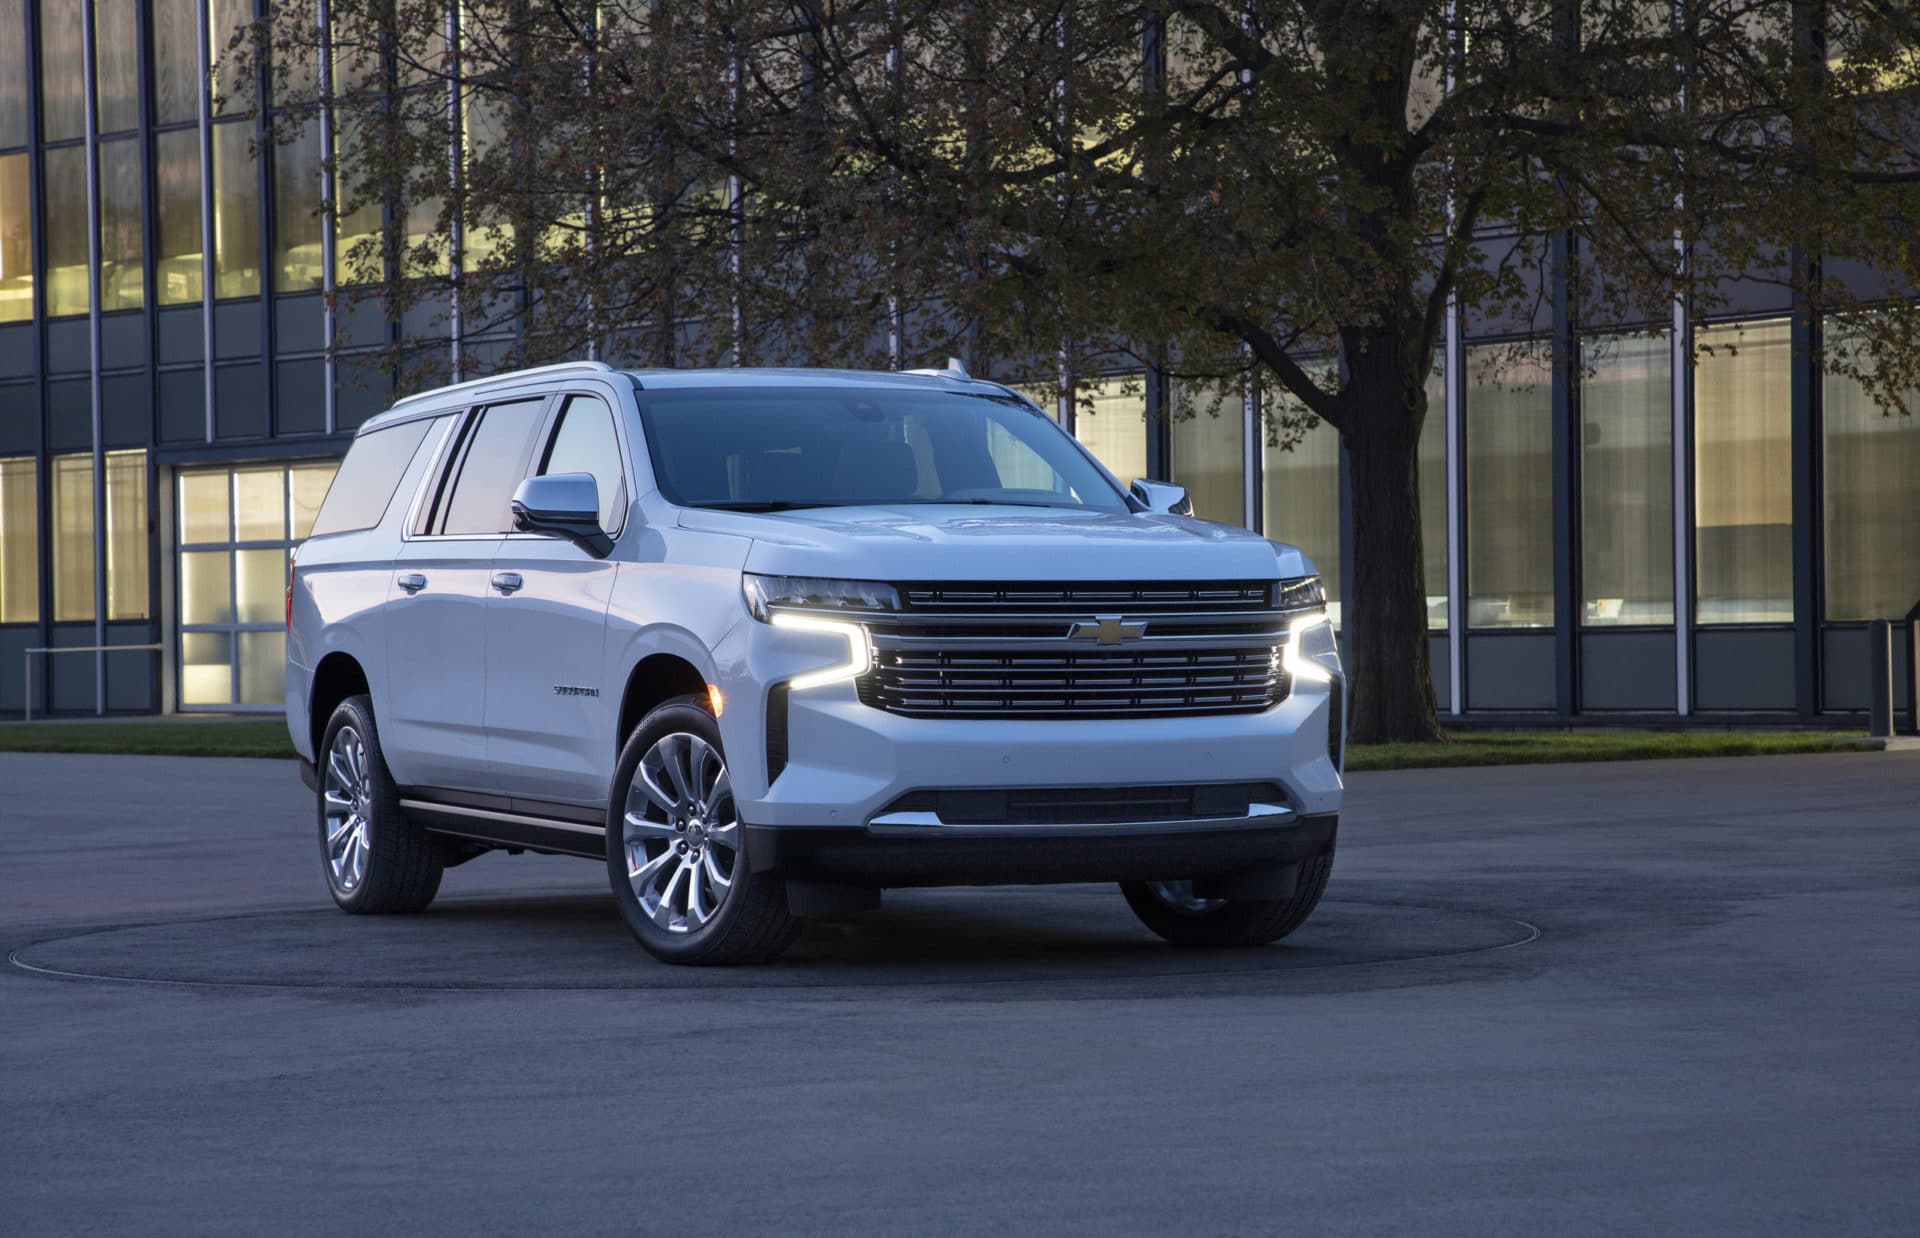 Car and Driver Lauds Braking of GM’s Large SUVs